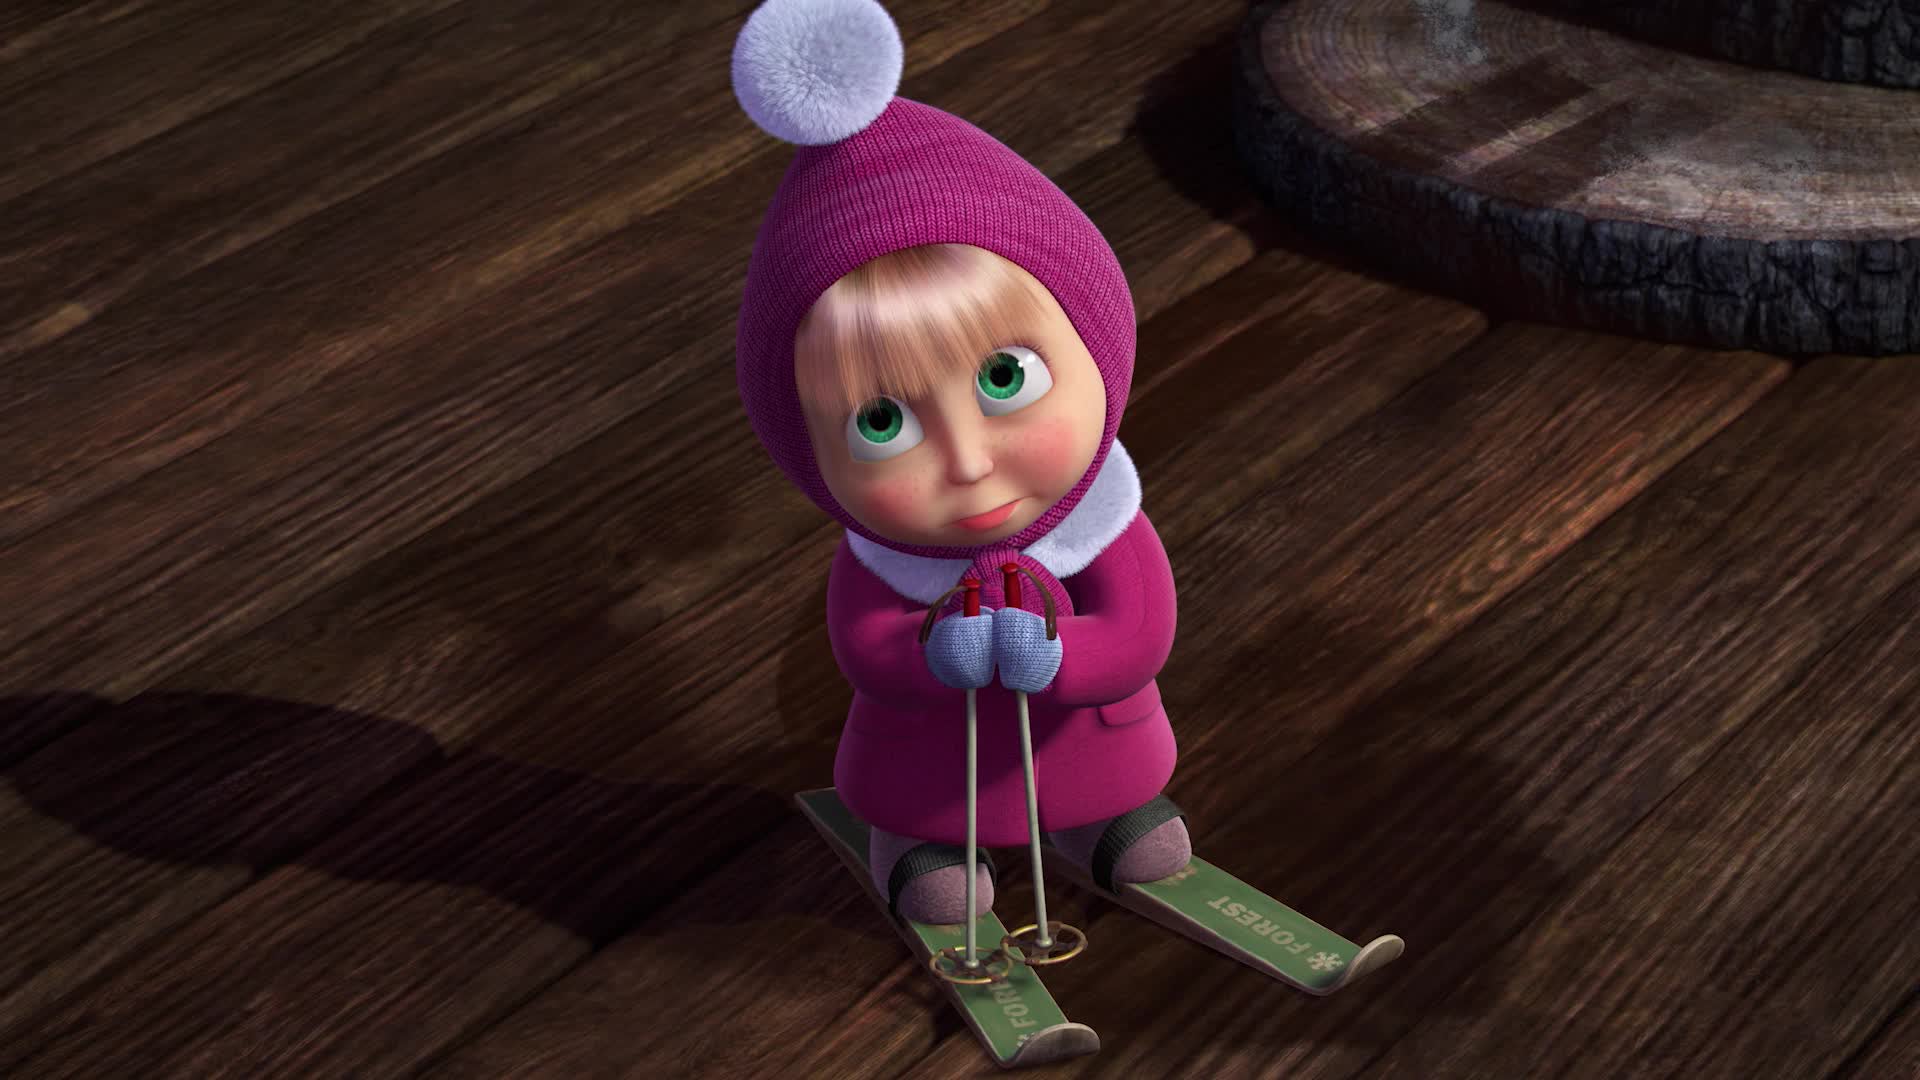 Watch Masha And The Bear Season 5 Episode 10 Mind Your Manners Watch Full Episode Onlinehd 